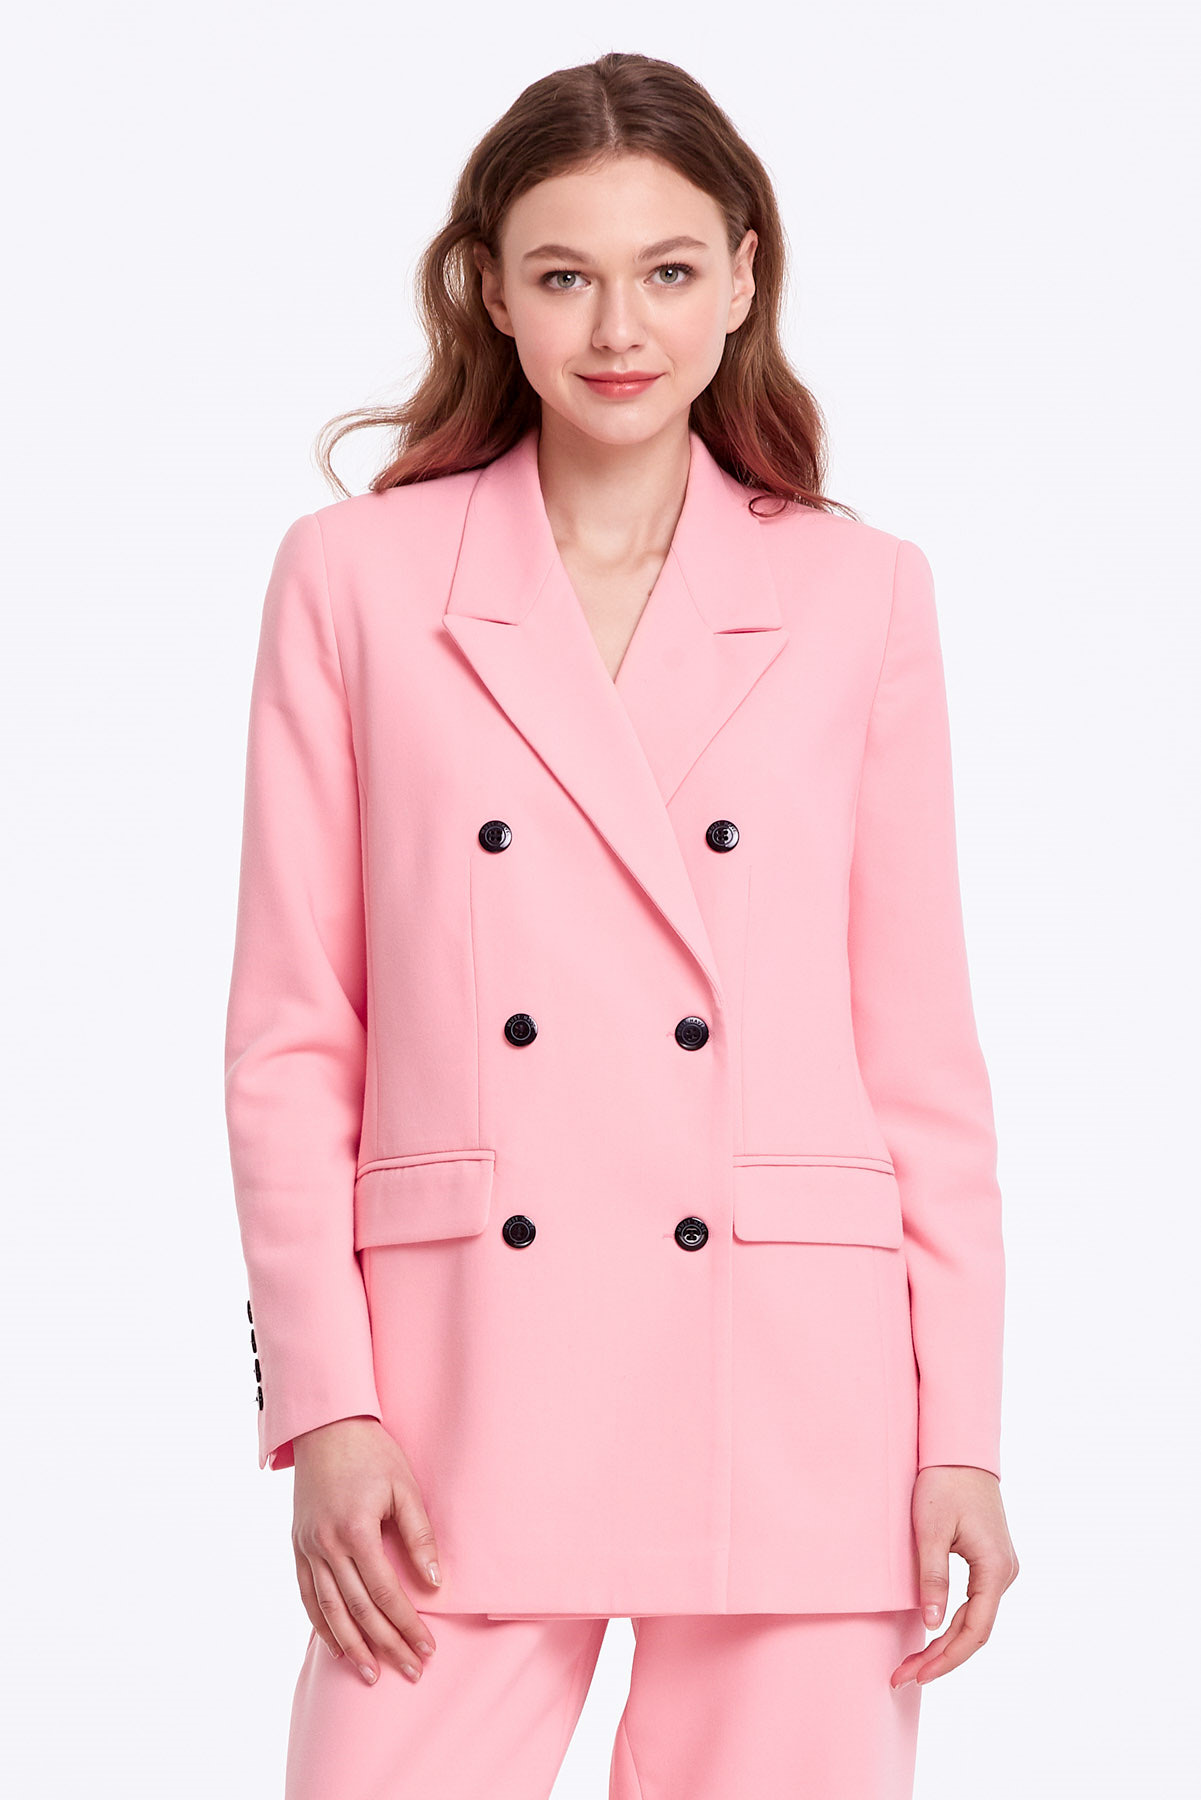 Double-breasted pink jacket with pockets, photo 1